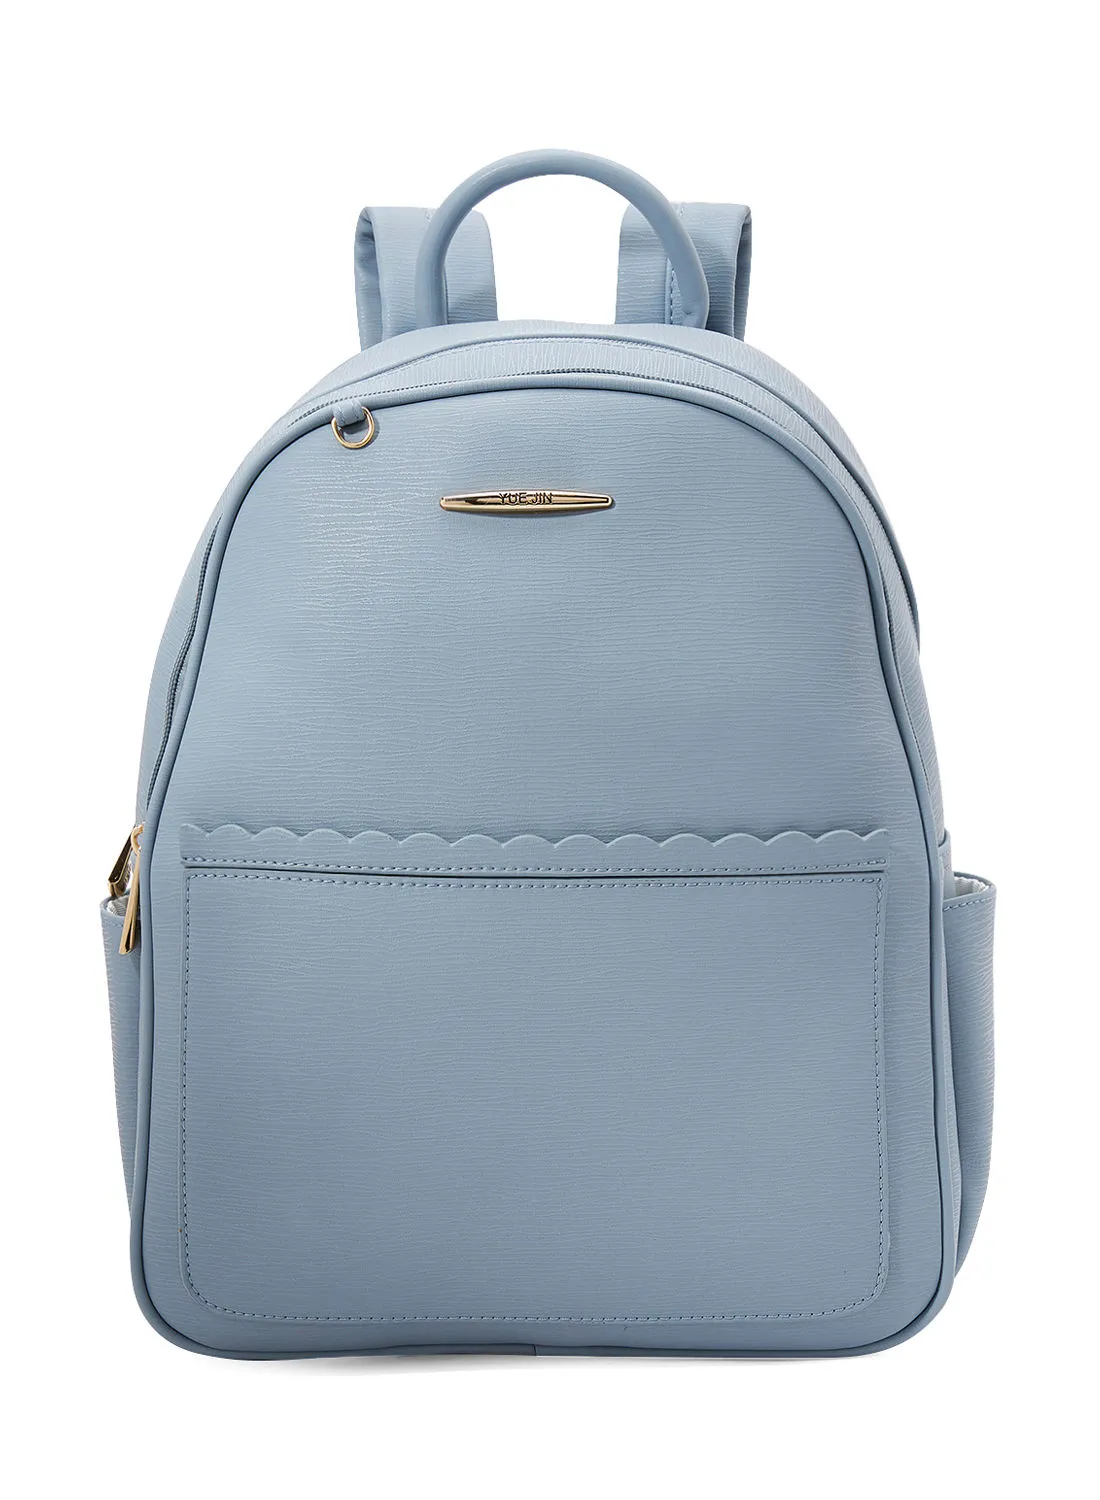 YUEJIN Faux Leather Backpack Blue